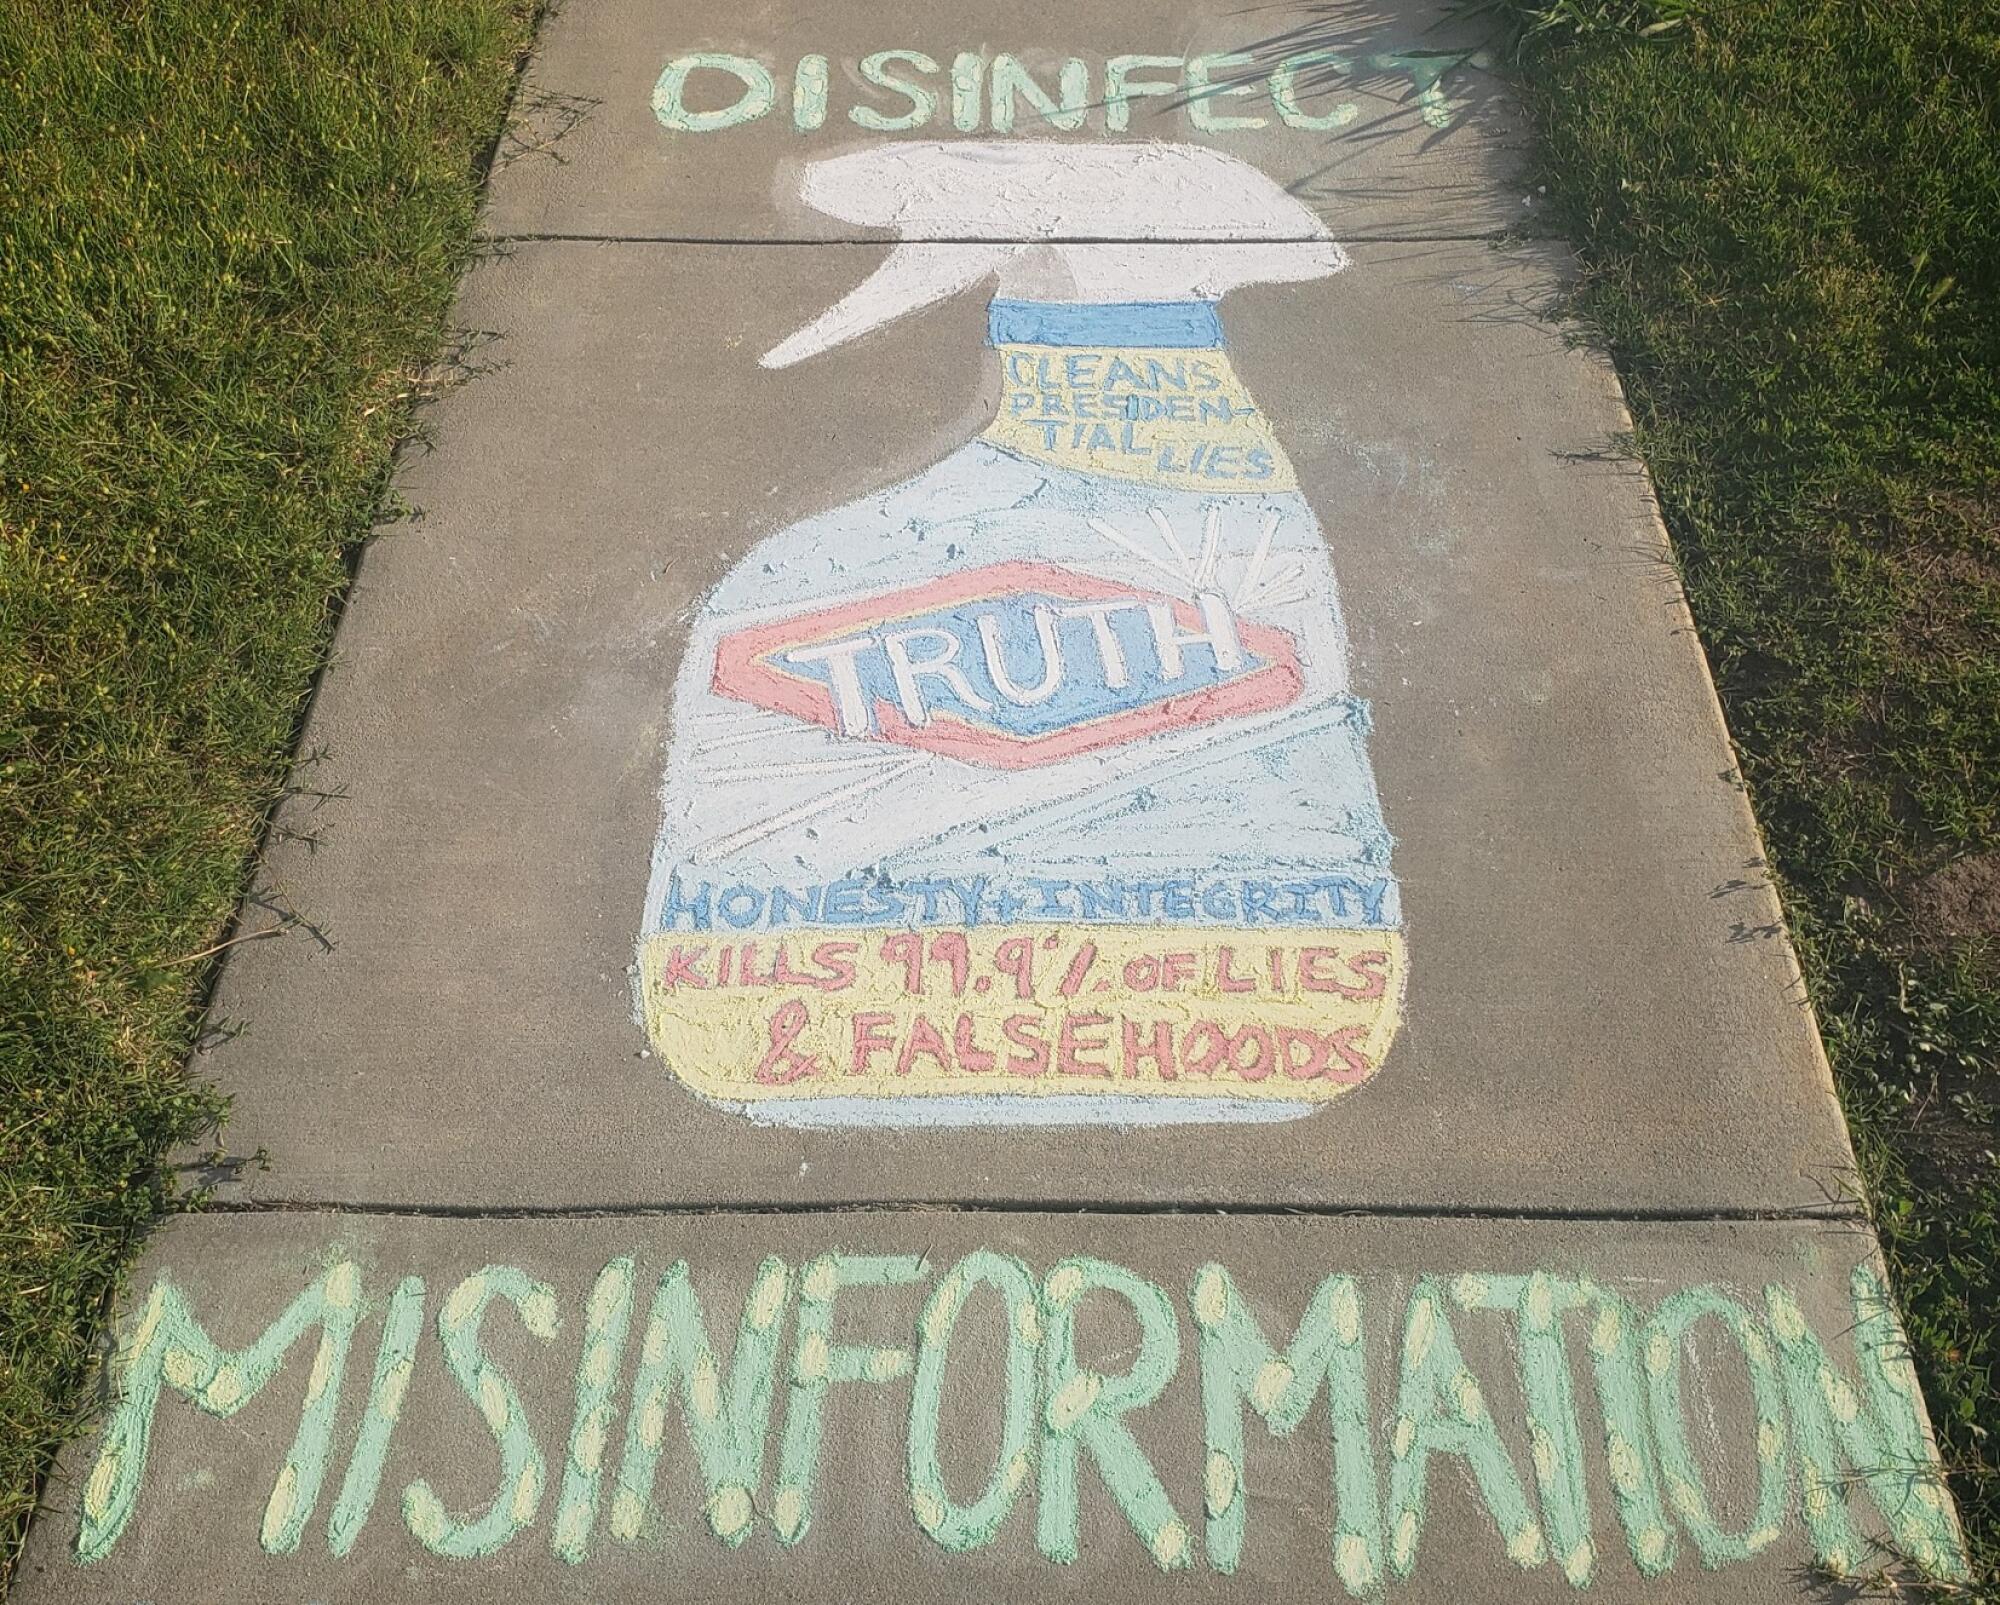 Sidewalk chalk art created by a 16-year-old says disinfect misinformation with a drawing of a spray bottle